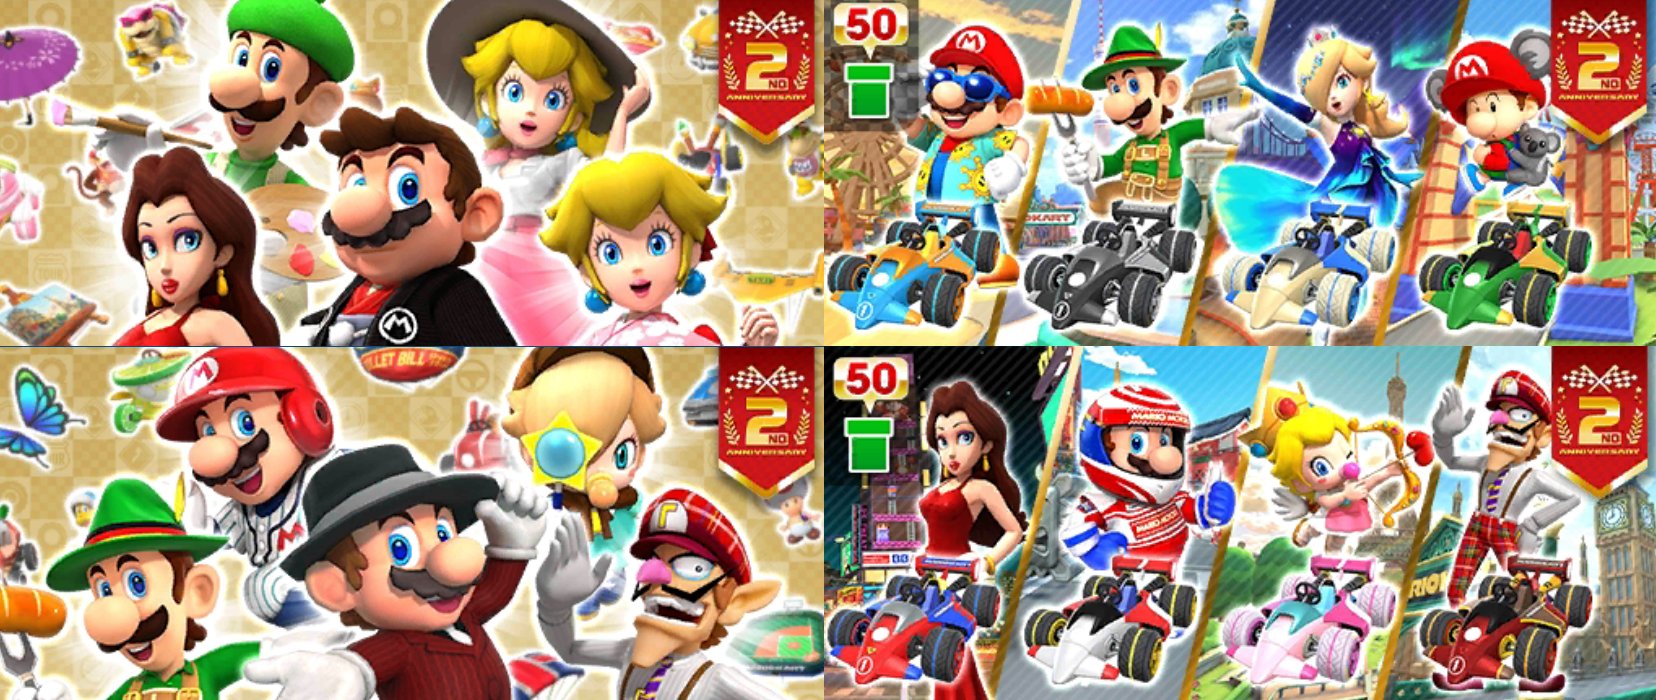 Mario Kart (Tour) News on X: News: The #NewYear's 2022 Tour Tour starts  now! Let's start racing! Stay tuned for updates/datamining! #MarioKartTour  Join our discord server:   /  X